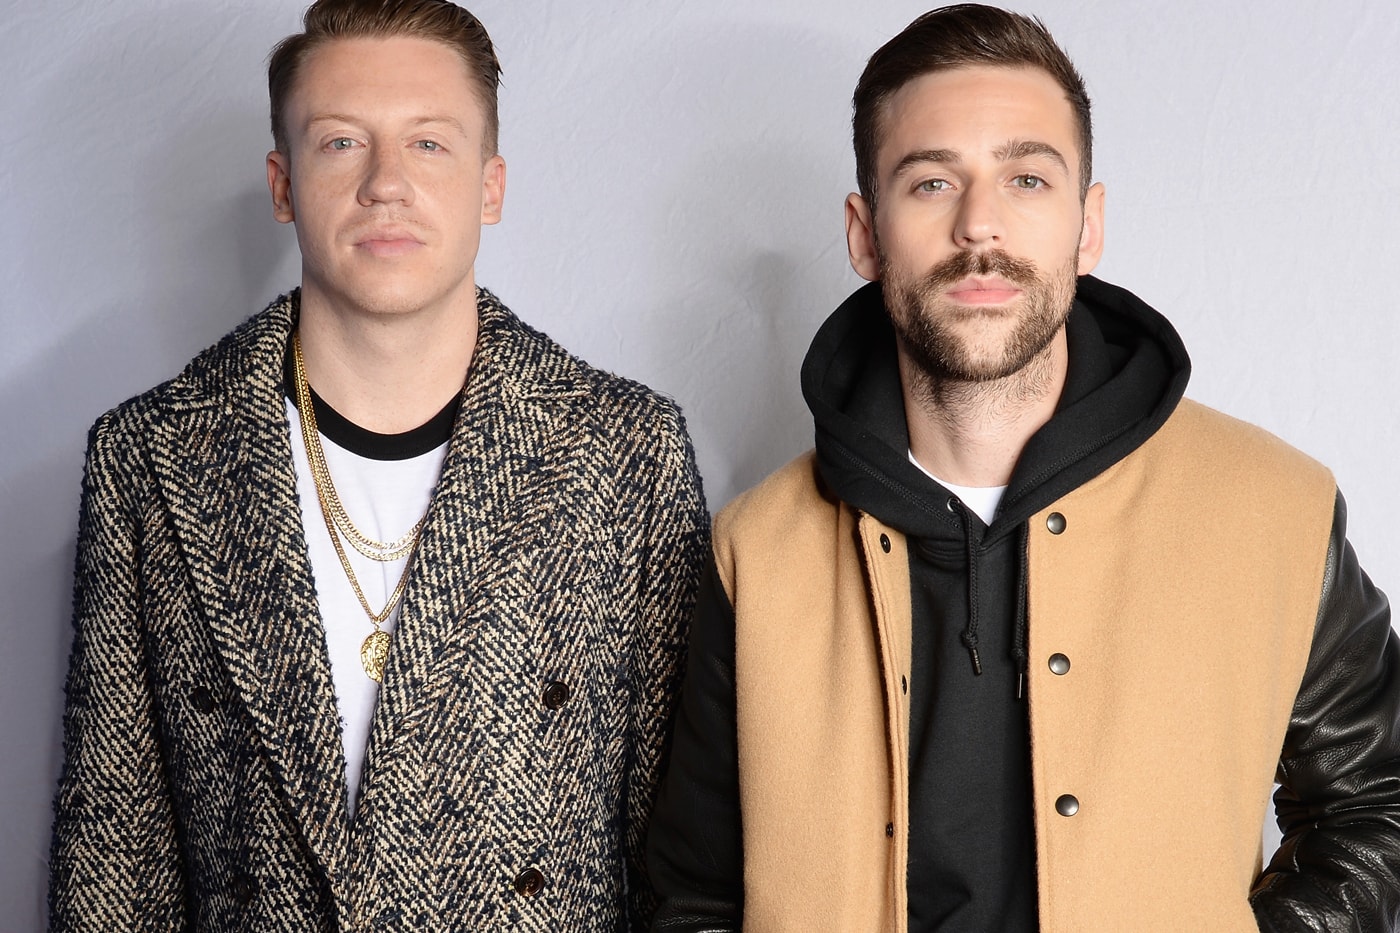 Macklemore and Ryan Lewis featuring Chance the Rapper, "Need To Know"